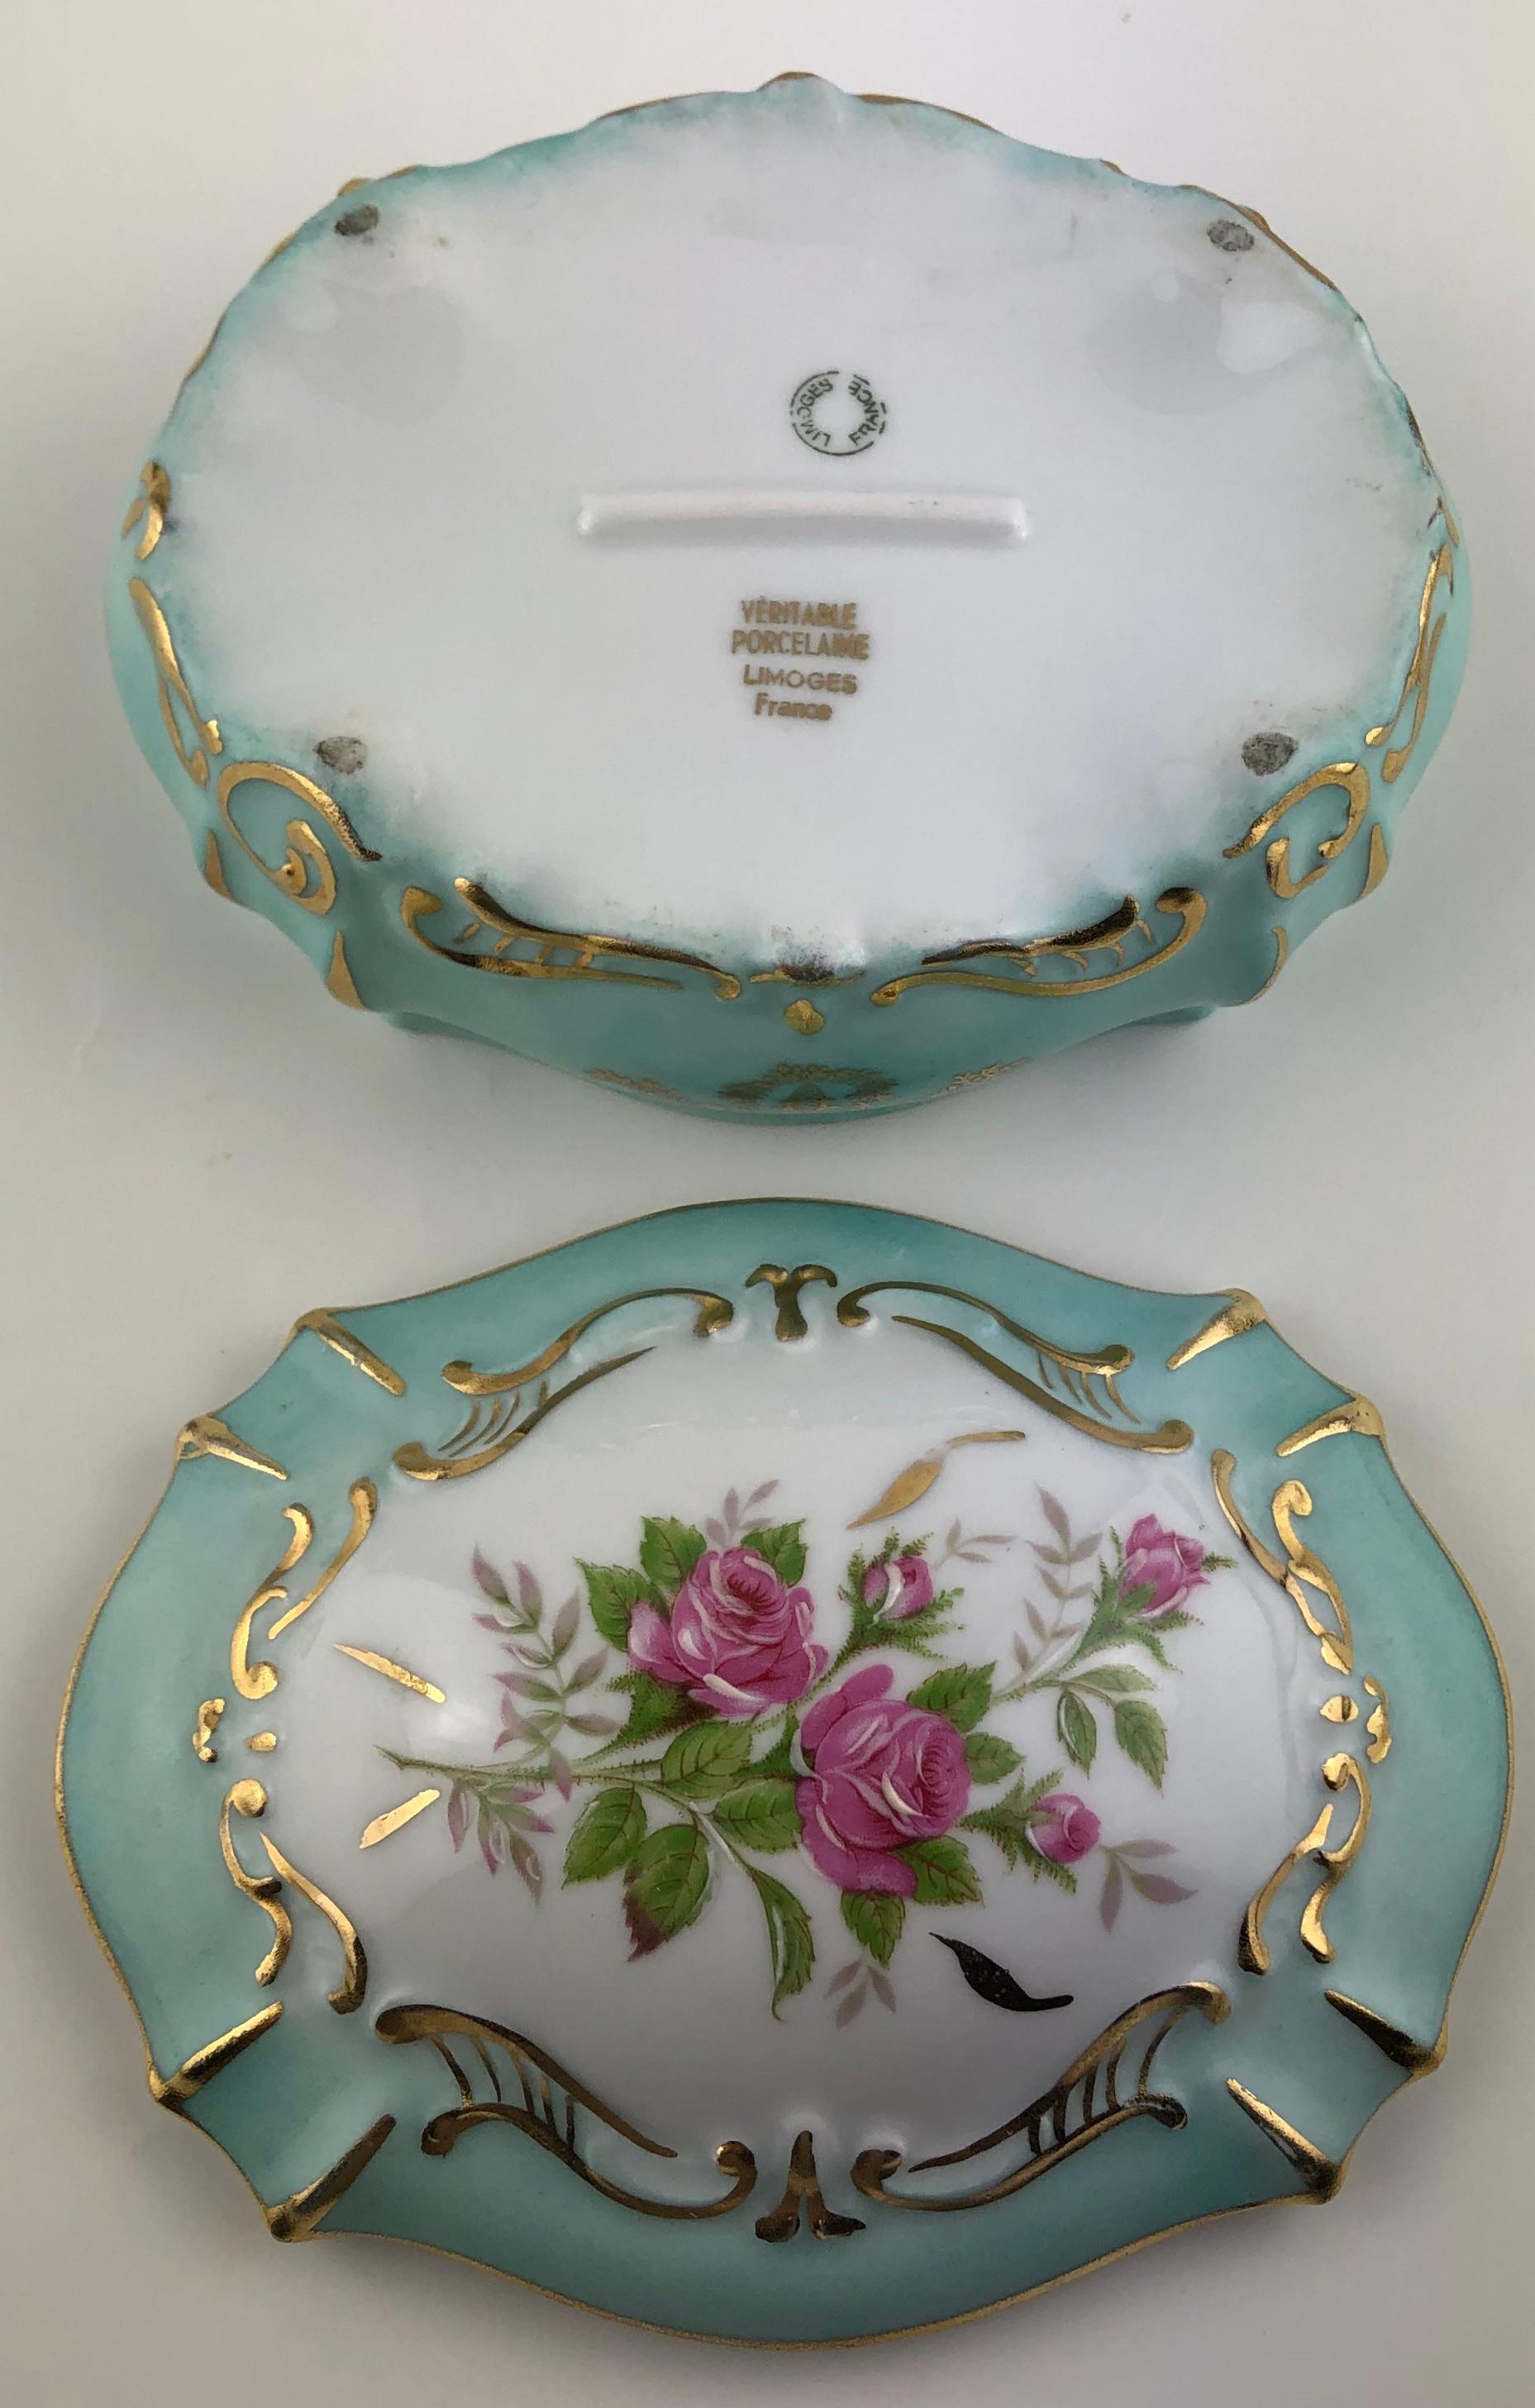 Glazed Exquisite French Limoges Hand Painted Gold Trim Trinket or Jewelry Box